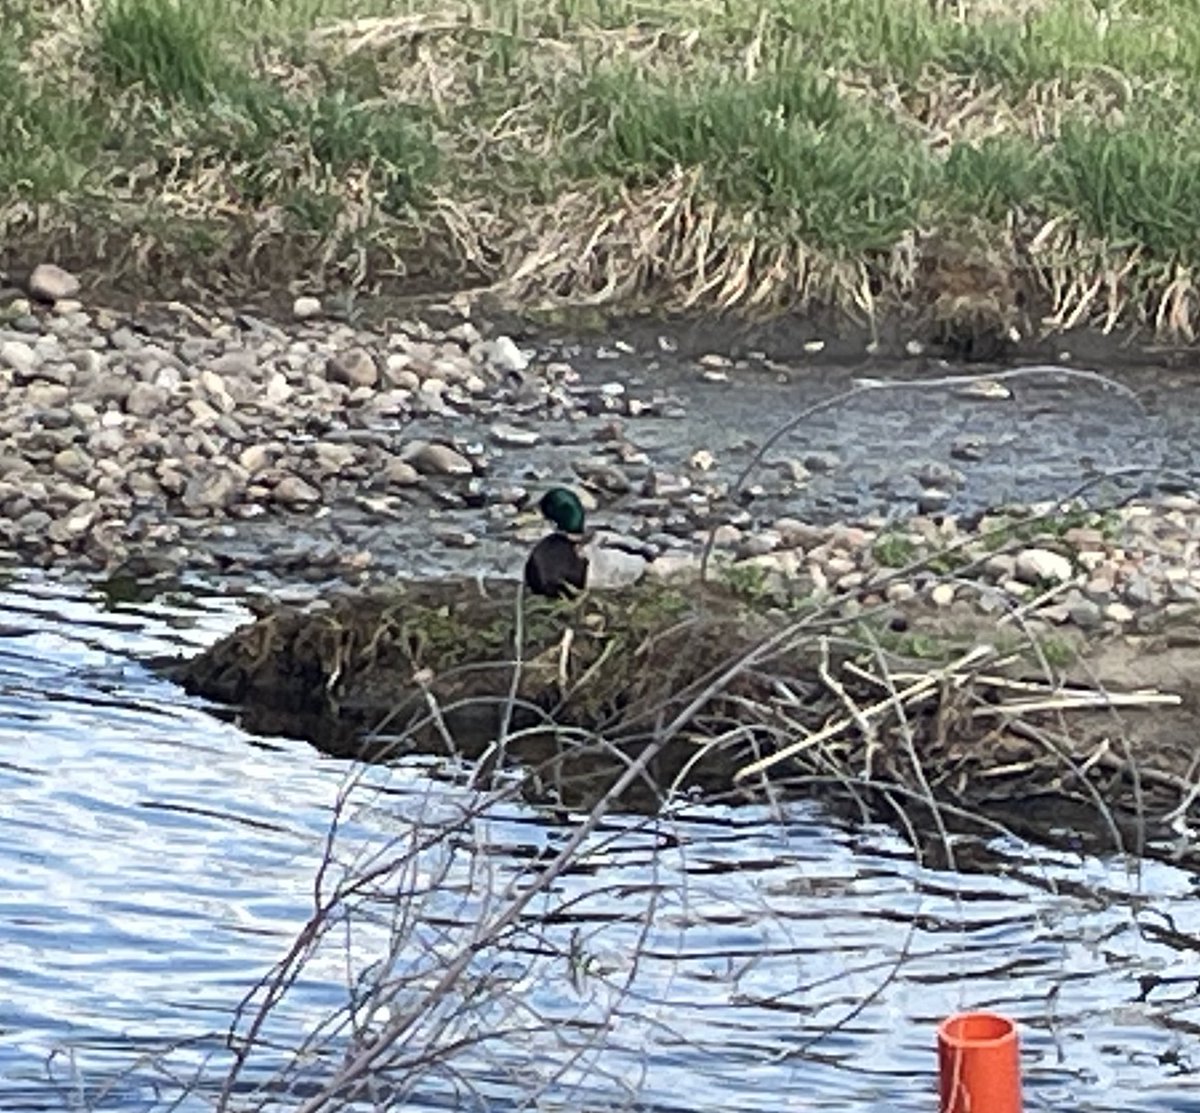 Sorry I’ve been so combative on Twitter lately I won’t be changing my behavior but here’s a bad picture of a duck I saw on my walk home as consolation 😸😸